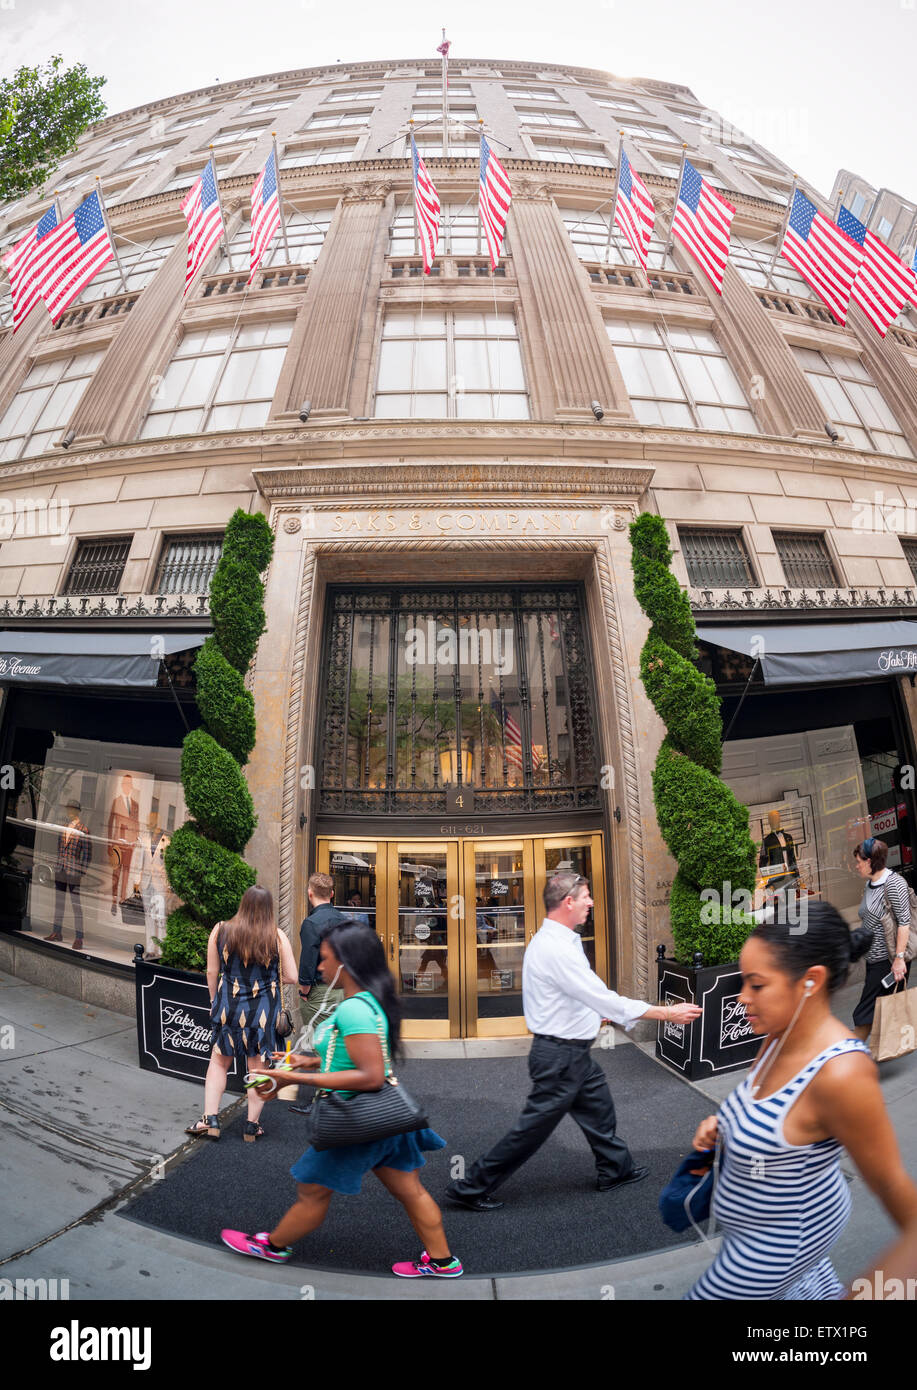 Inside Saks Fifth Avenue Department Store in New York City [4K] 